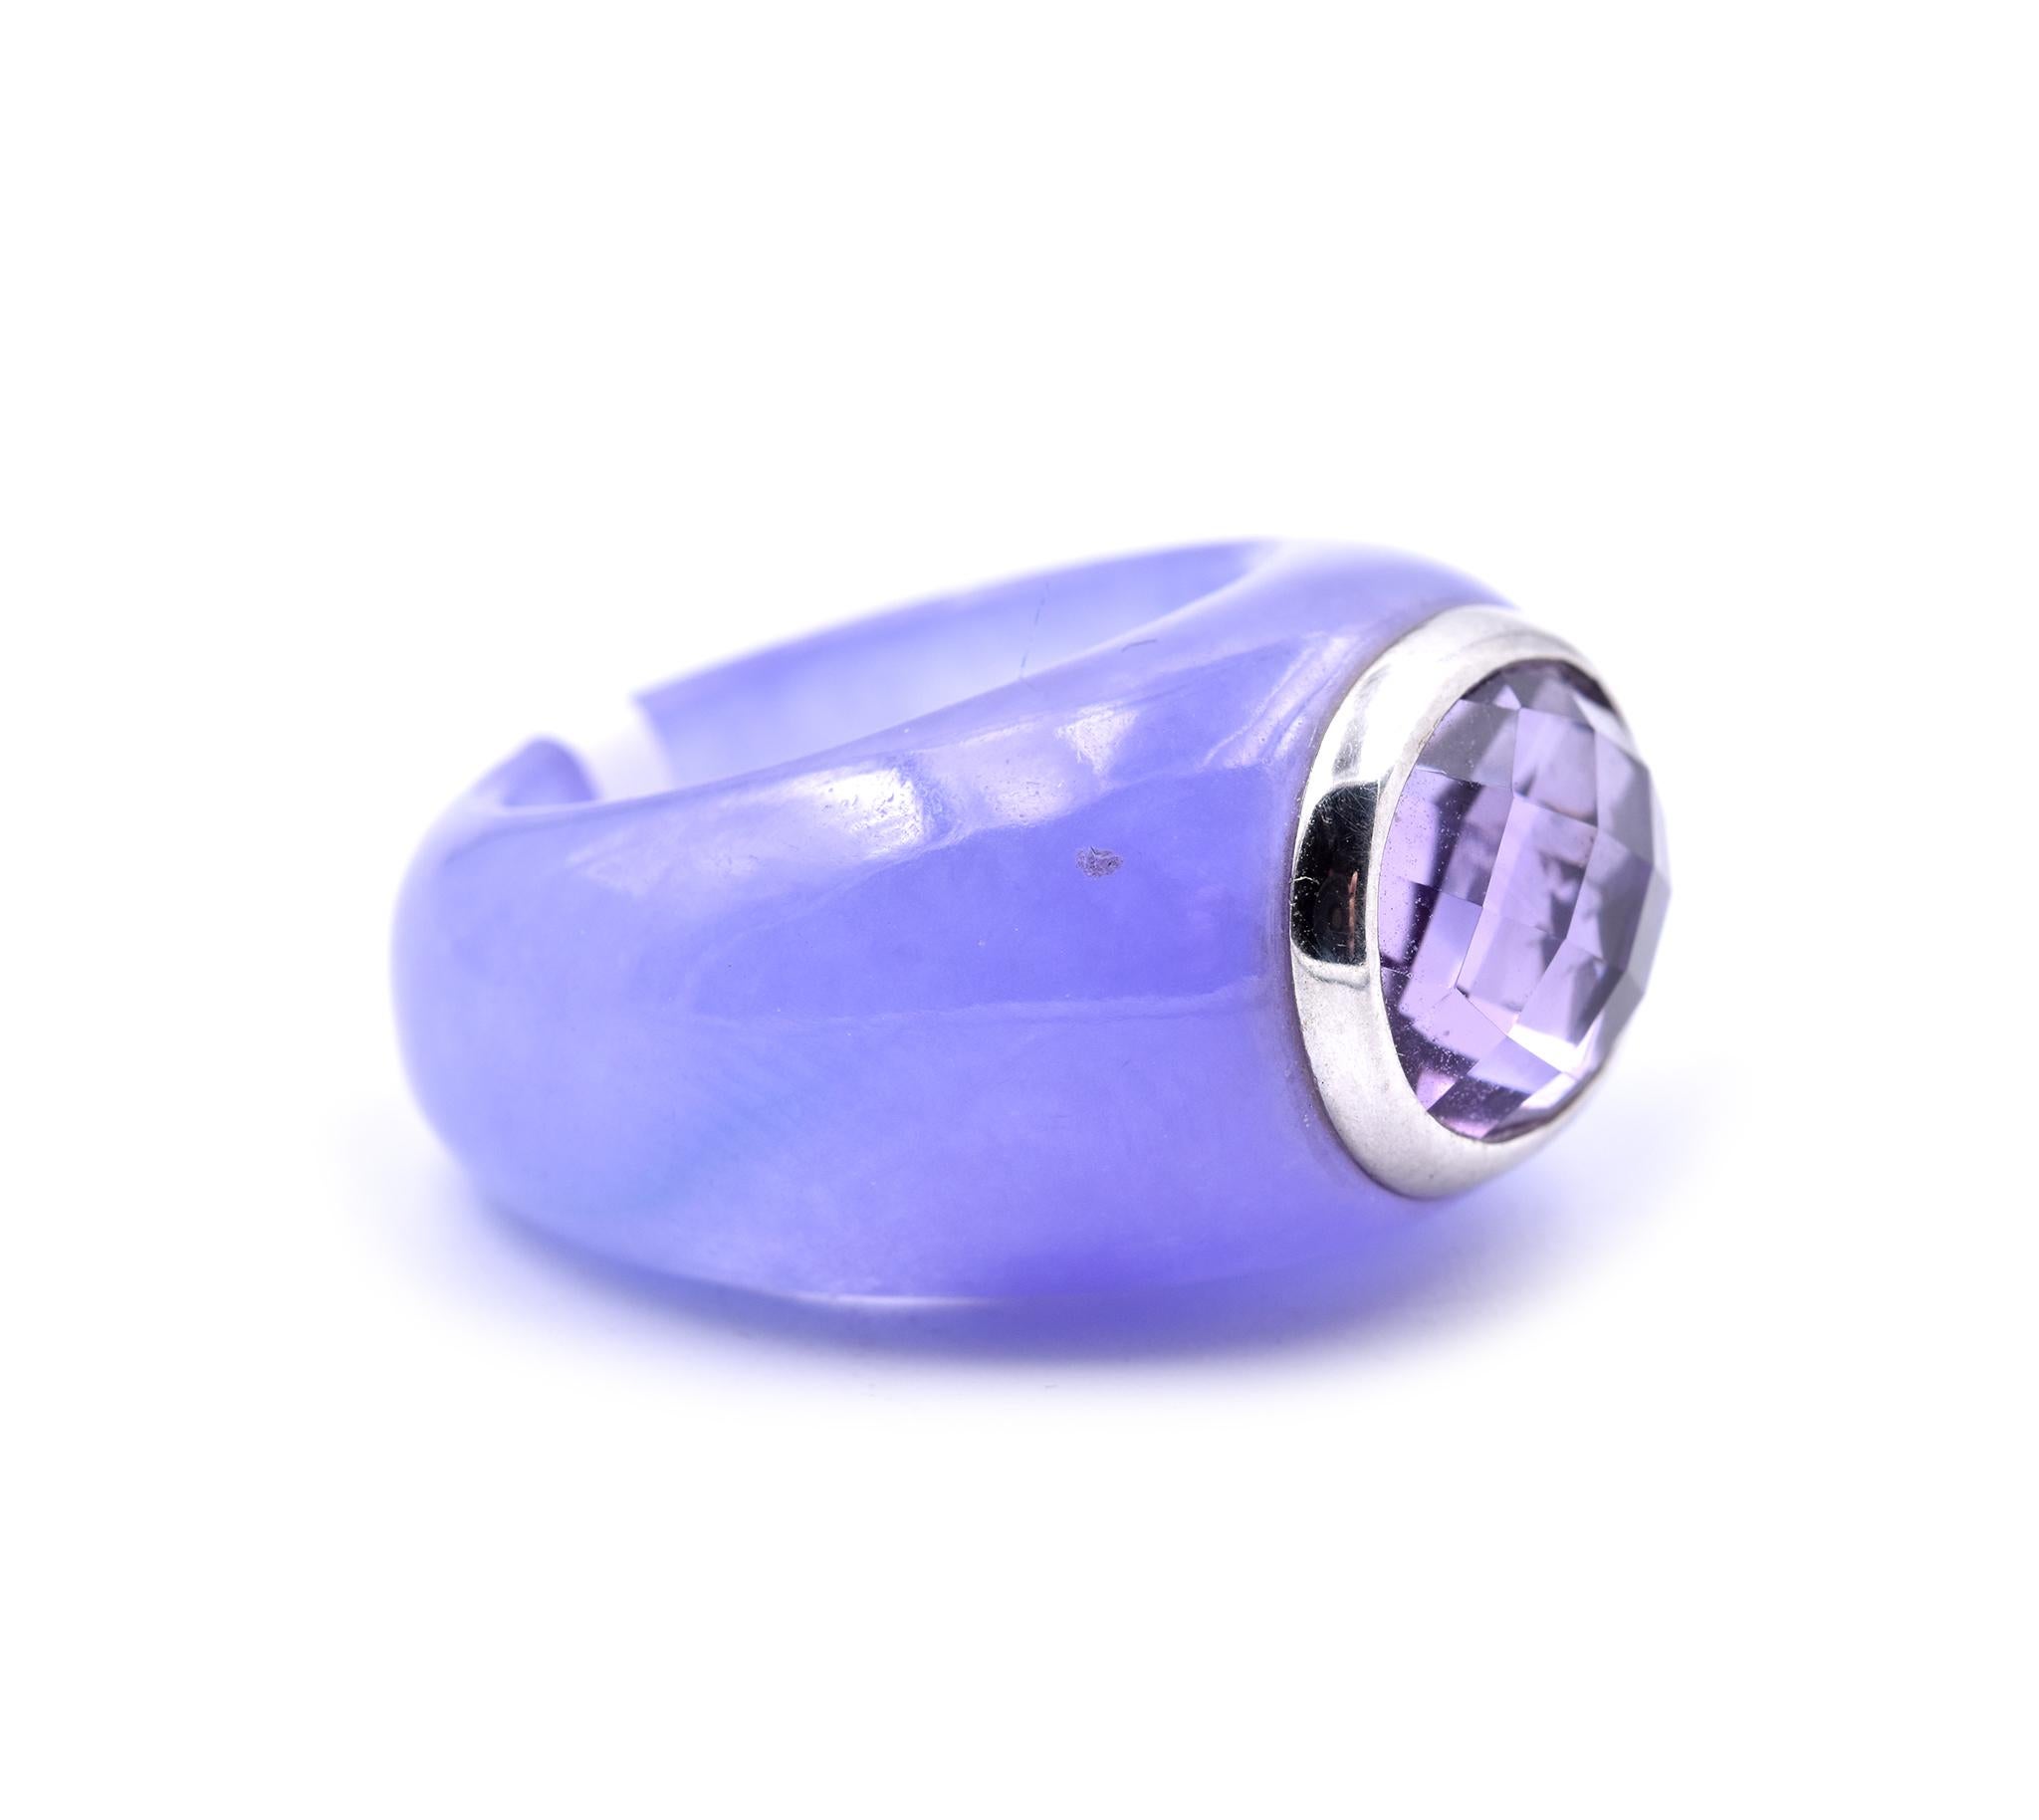 Designer: custom
Material: 18k white gold
Jade: purple jade band
Amethyst: Oval cut= 1.50ct
Ring size: 6 
Dimensions: ring is approximately 28.95mm by 24.61mm
Weight: 10.14 grams